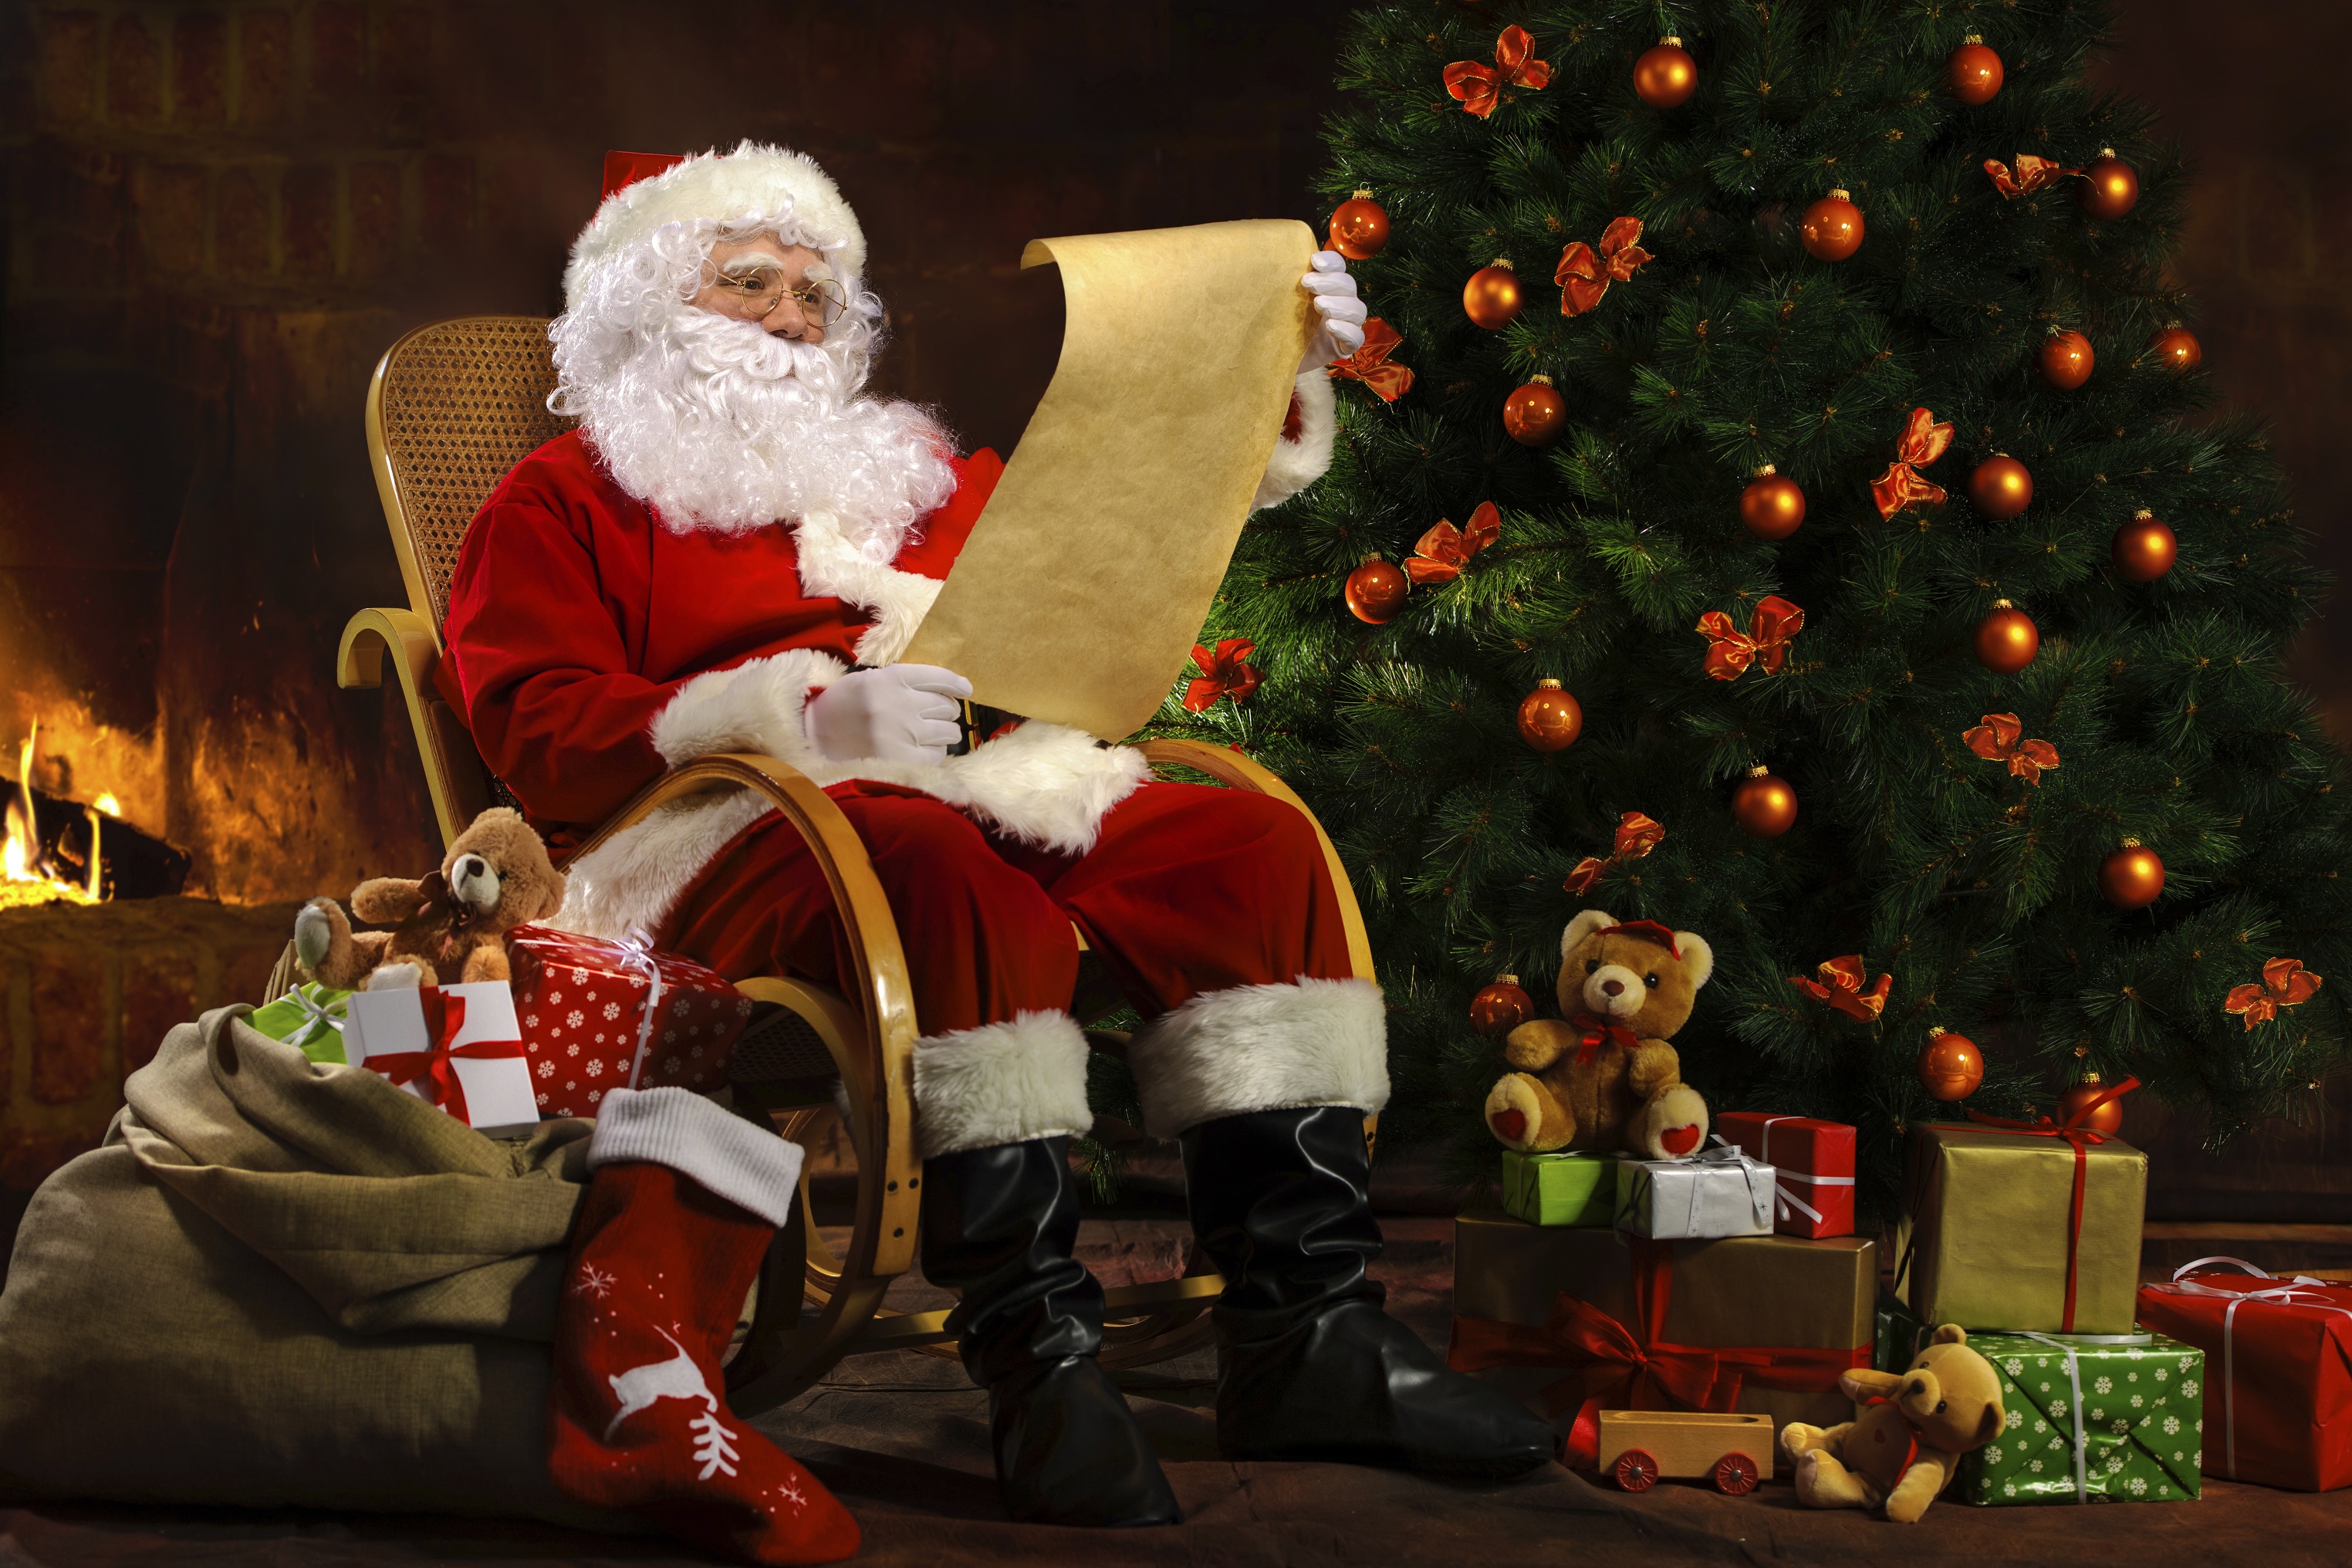 Argan Oil Hair Products are at the Top of Santa’s List